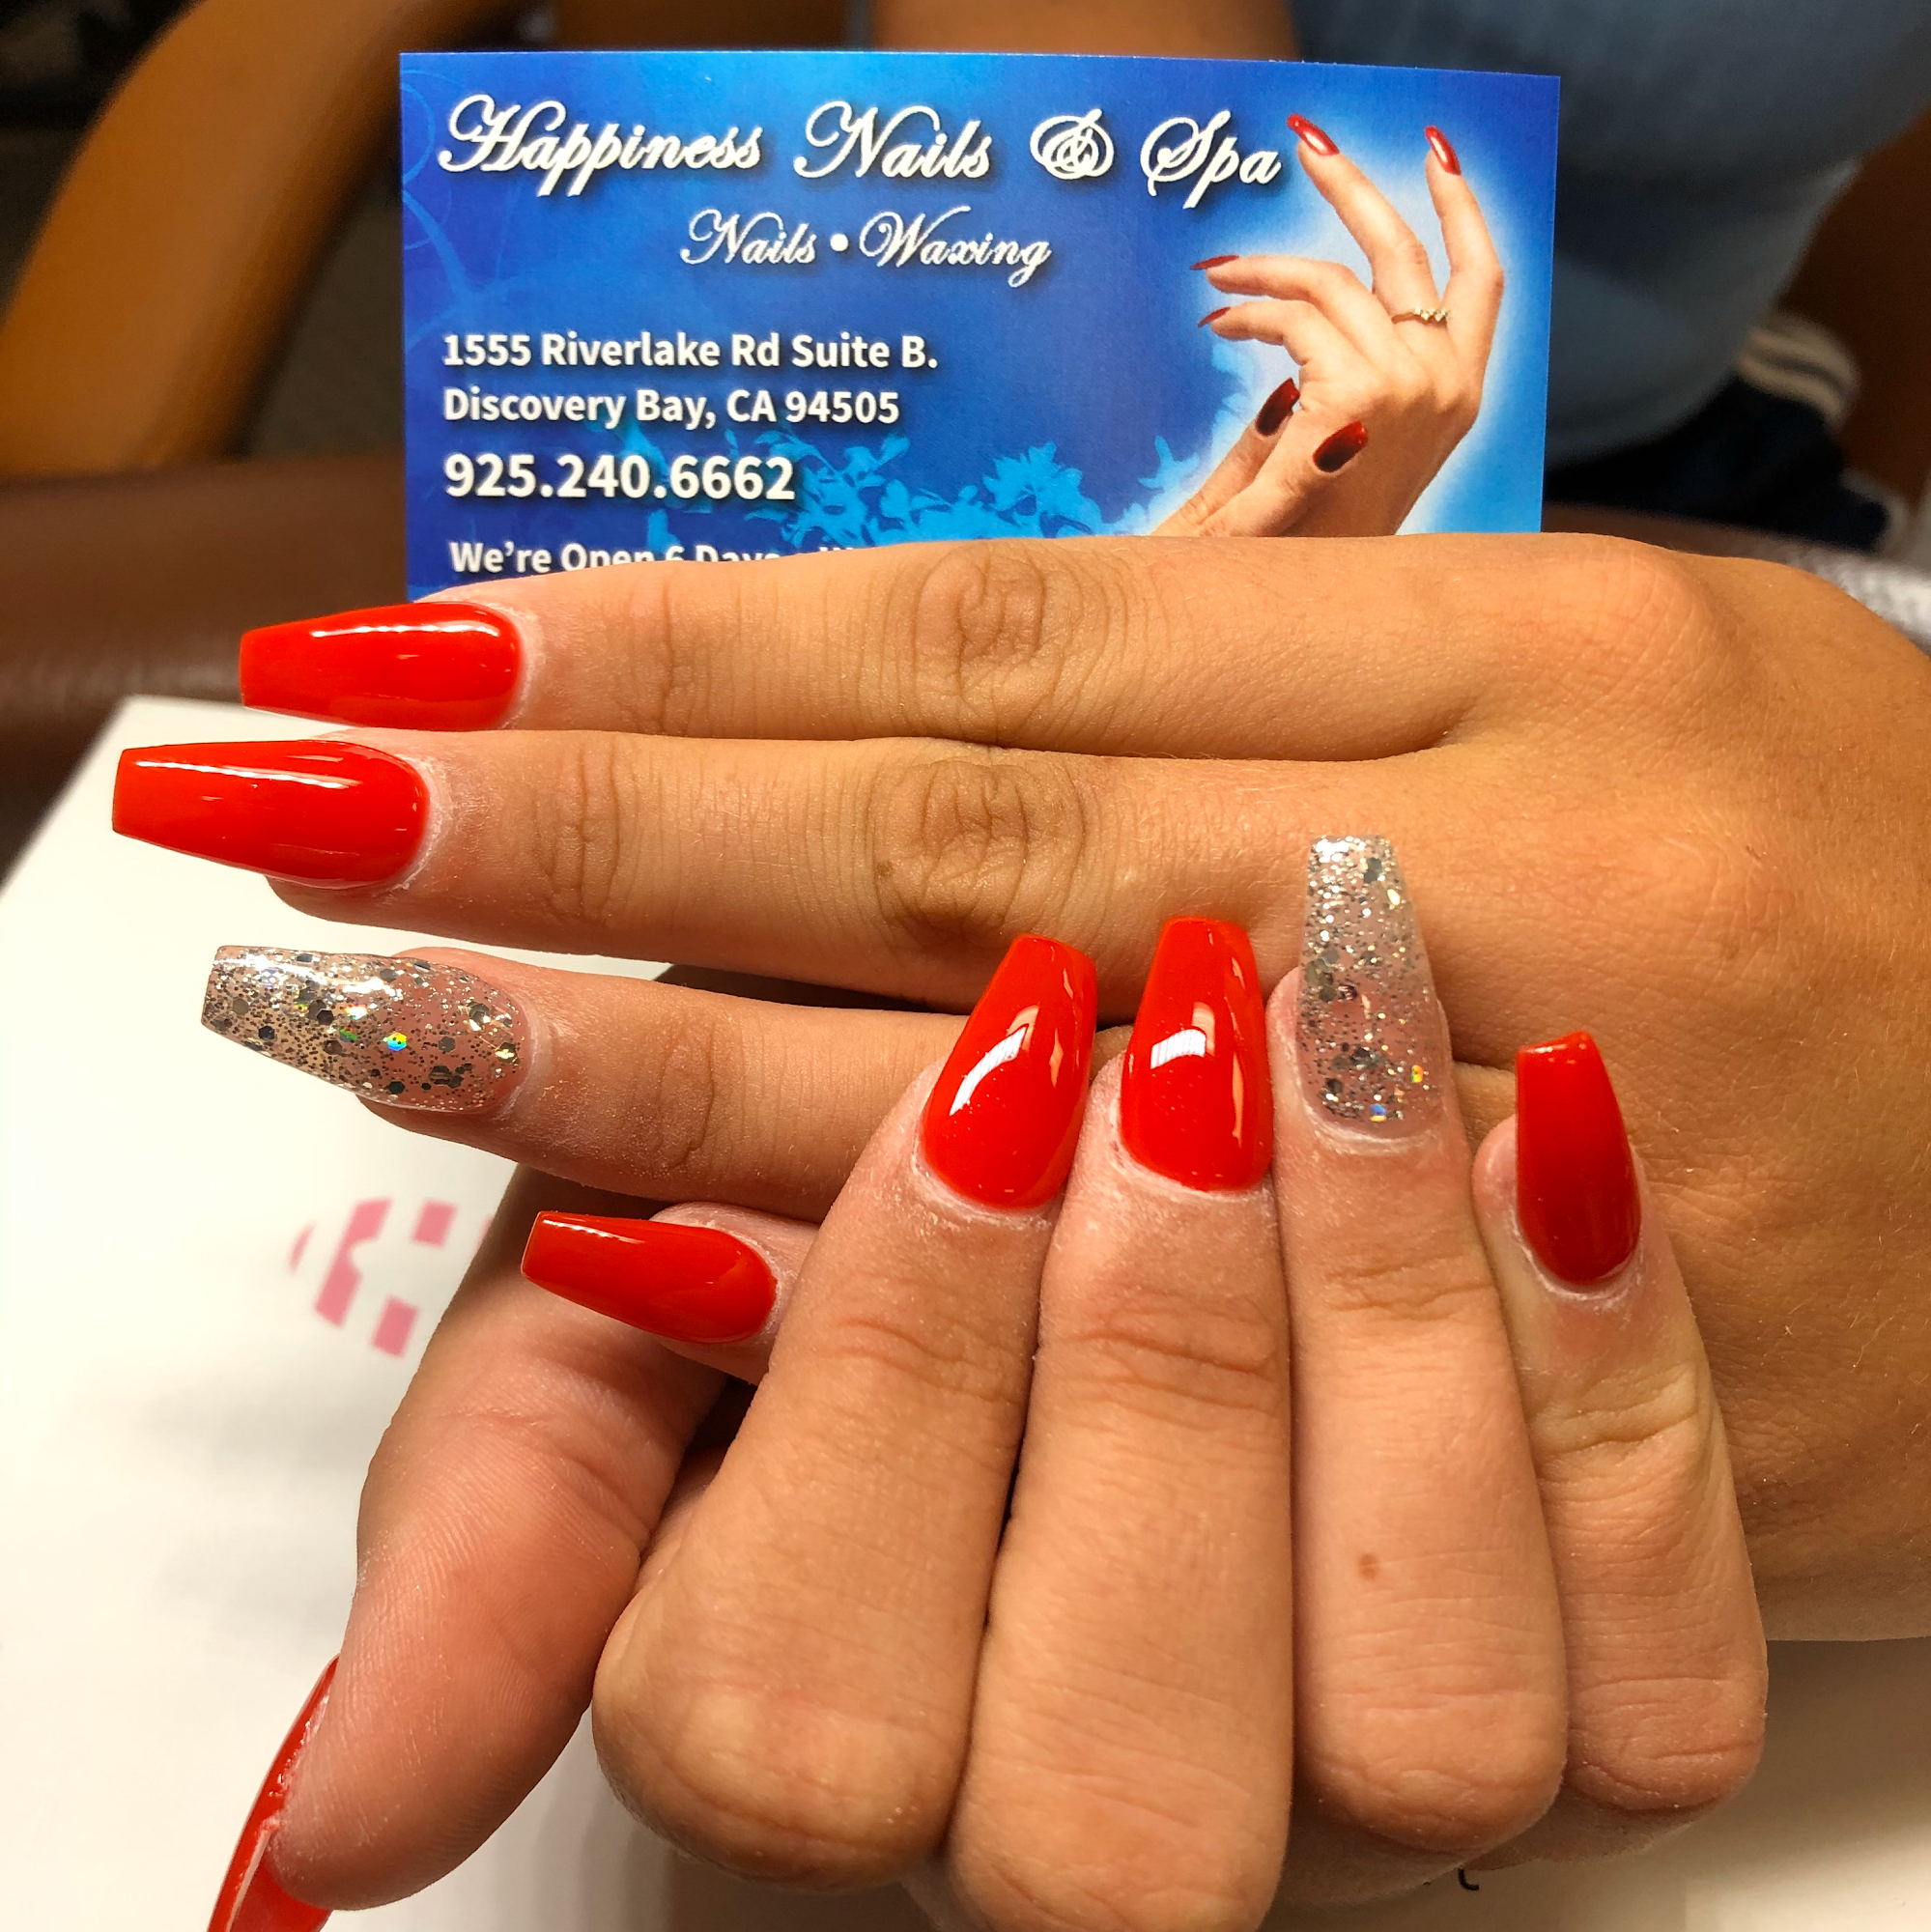 Happiness Nails & Spa 1555 Riverlake Rd suite b, Discovery Bay California 94505